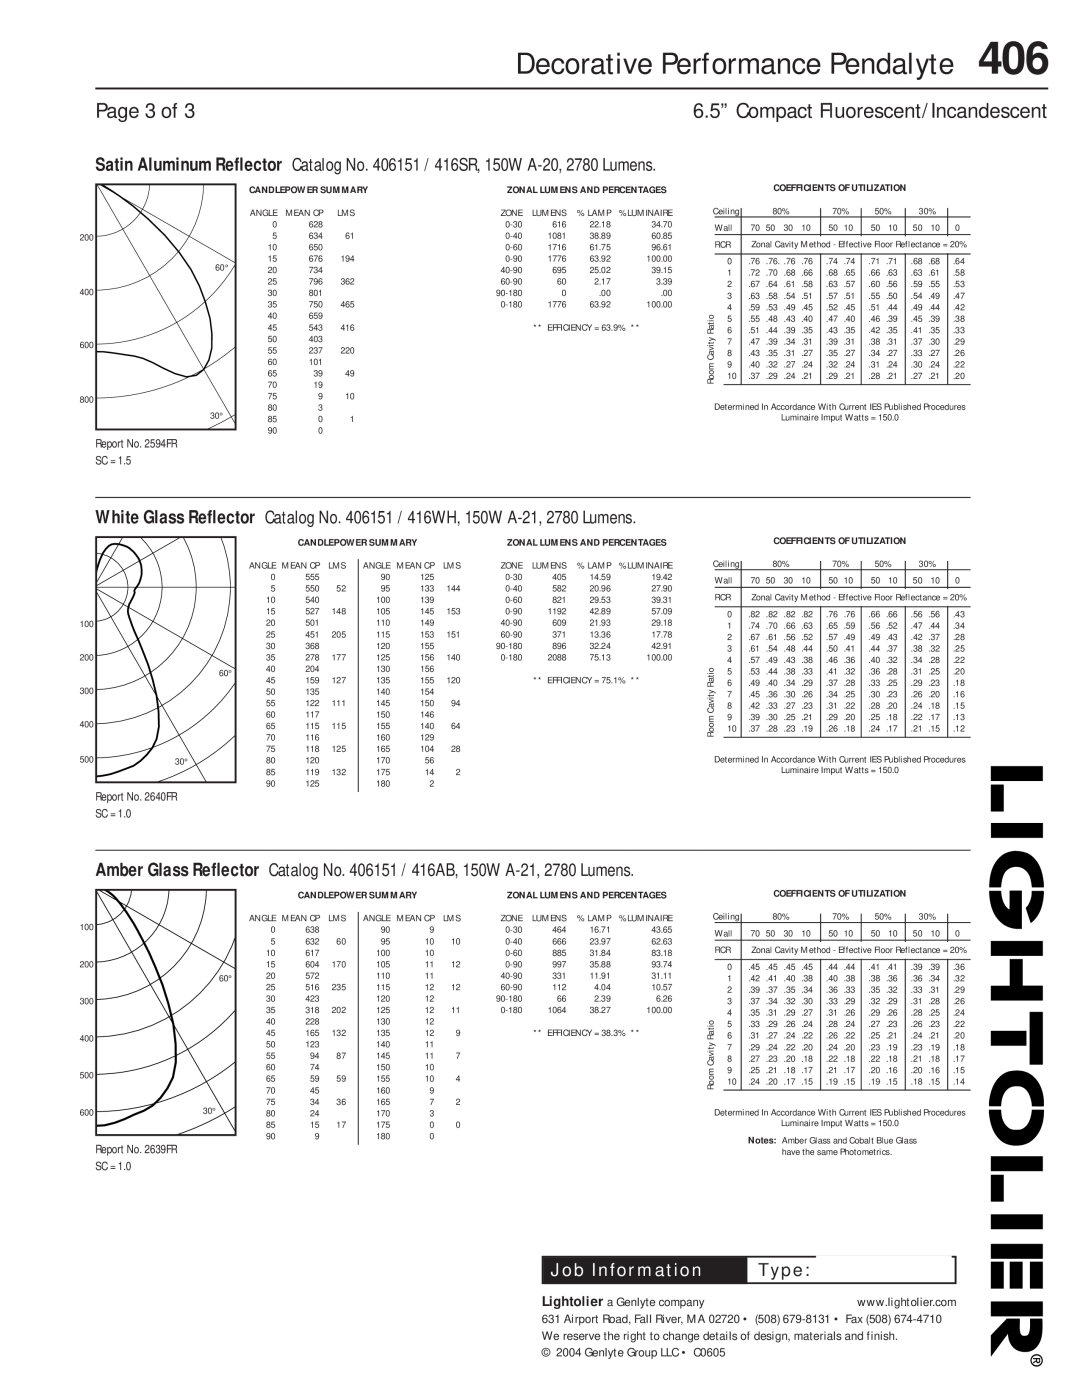 Lightolier 406 dimensions Page 3 of, Decorative Performance Pendalyte, Report No. 2594FR SC =, Report No. 2640FR SC = 